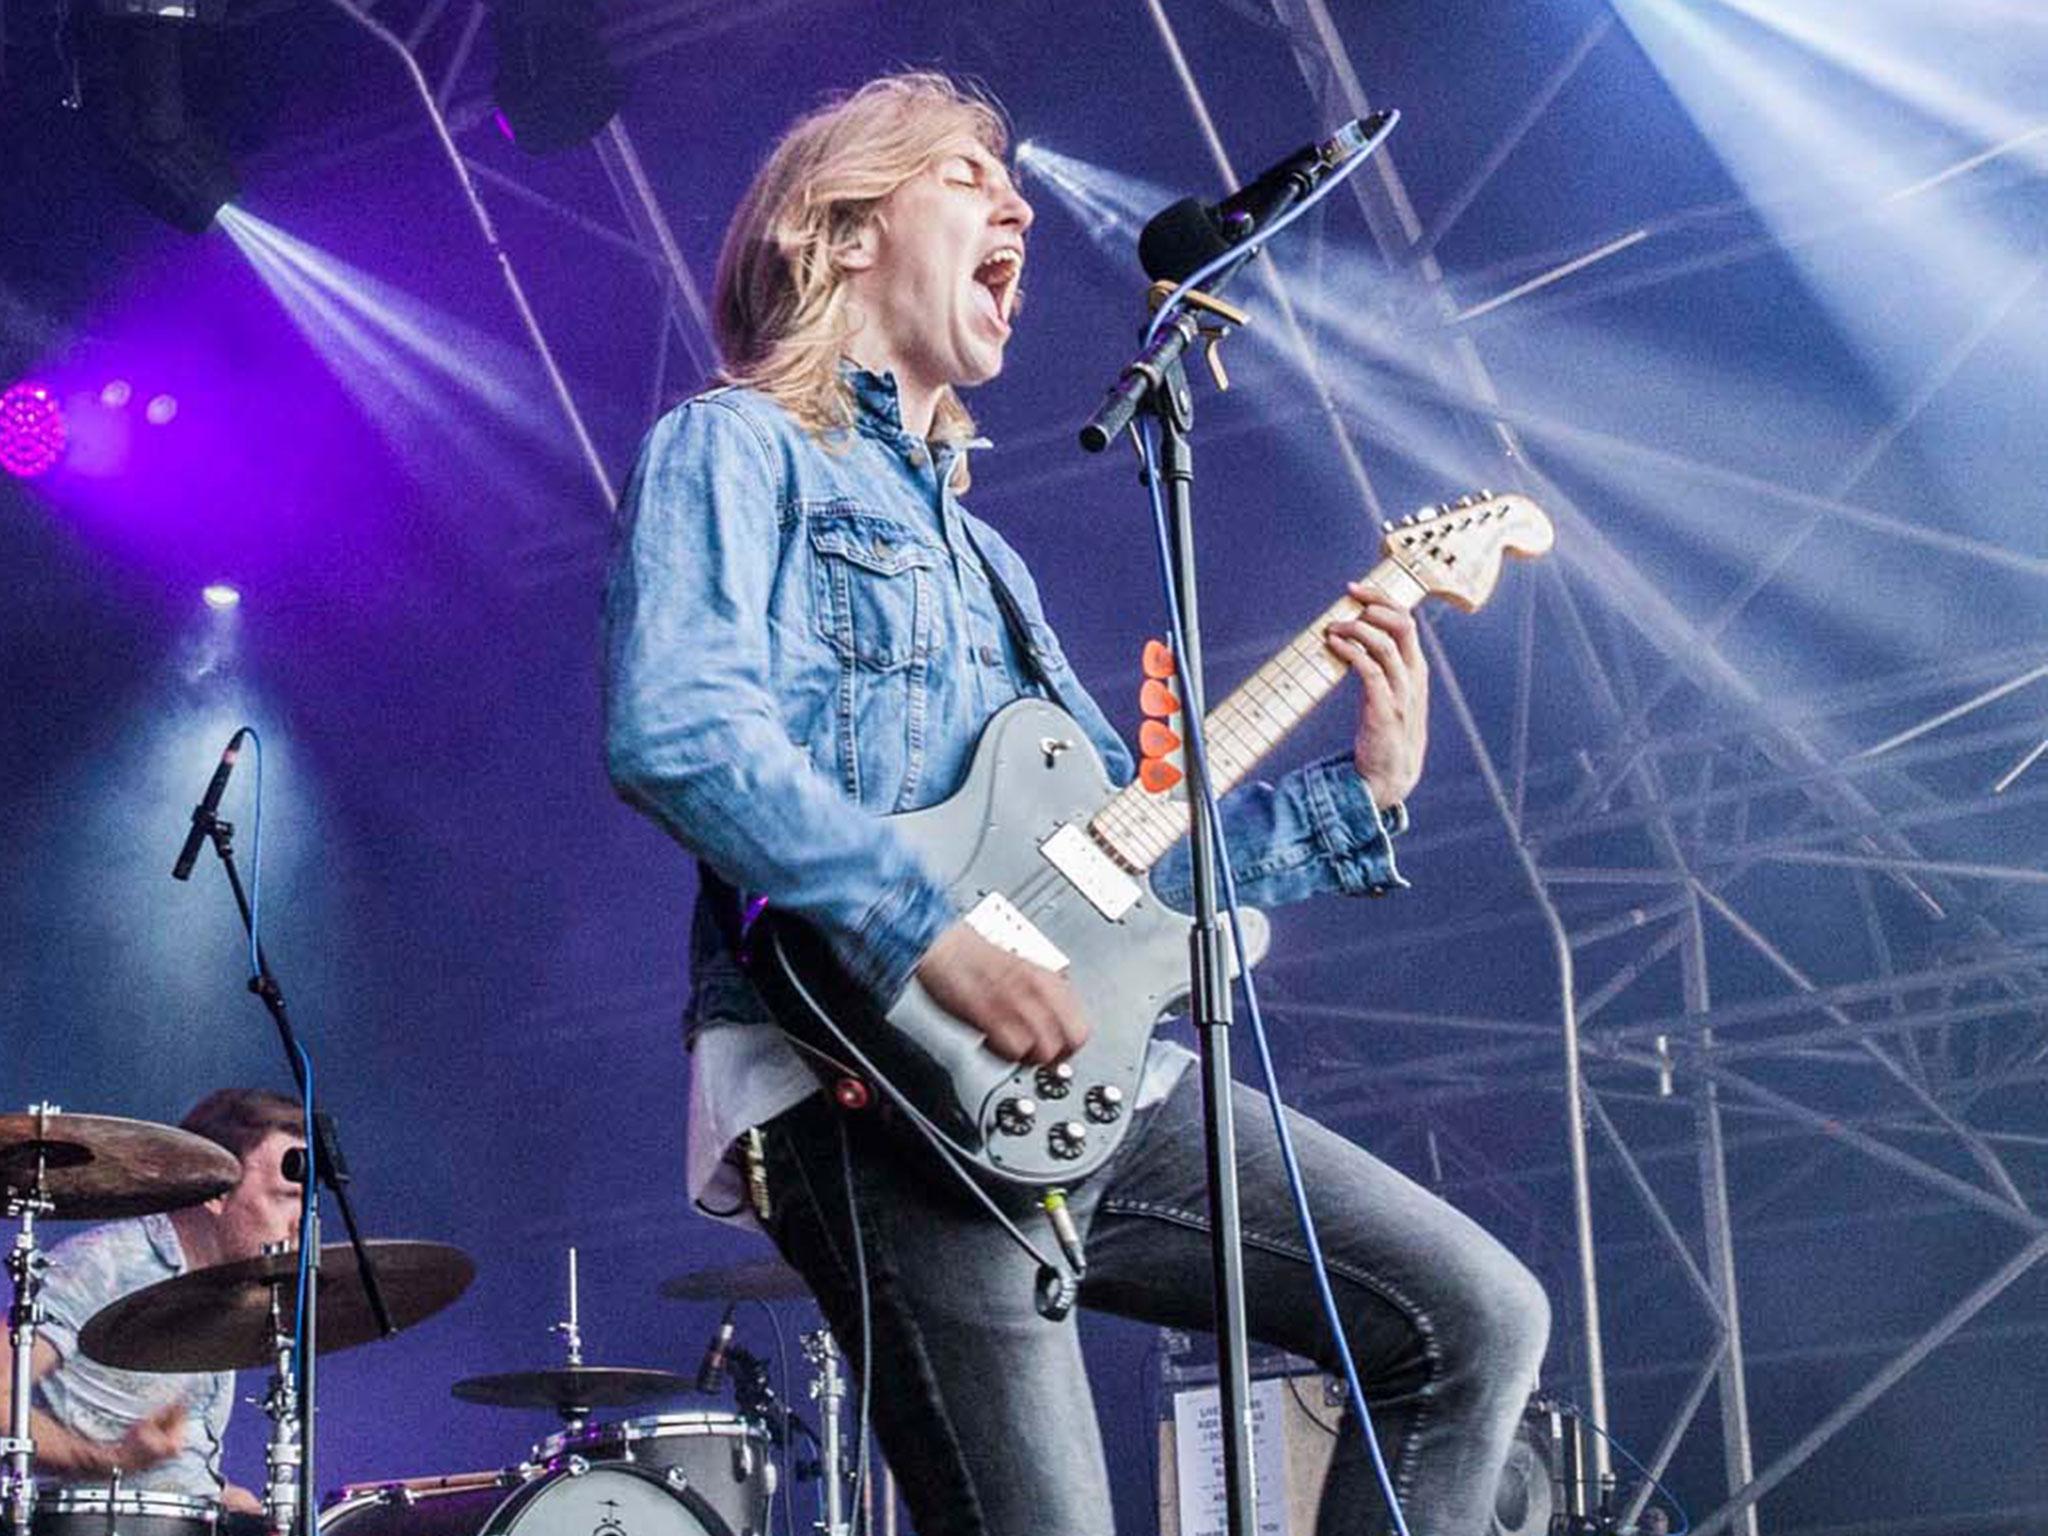 Murray Macleod of The Xcerts playing the main stage at 2000trees 2015